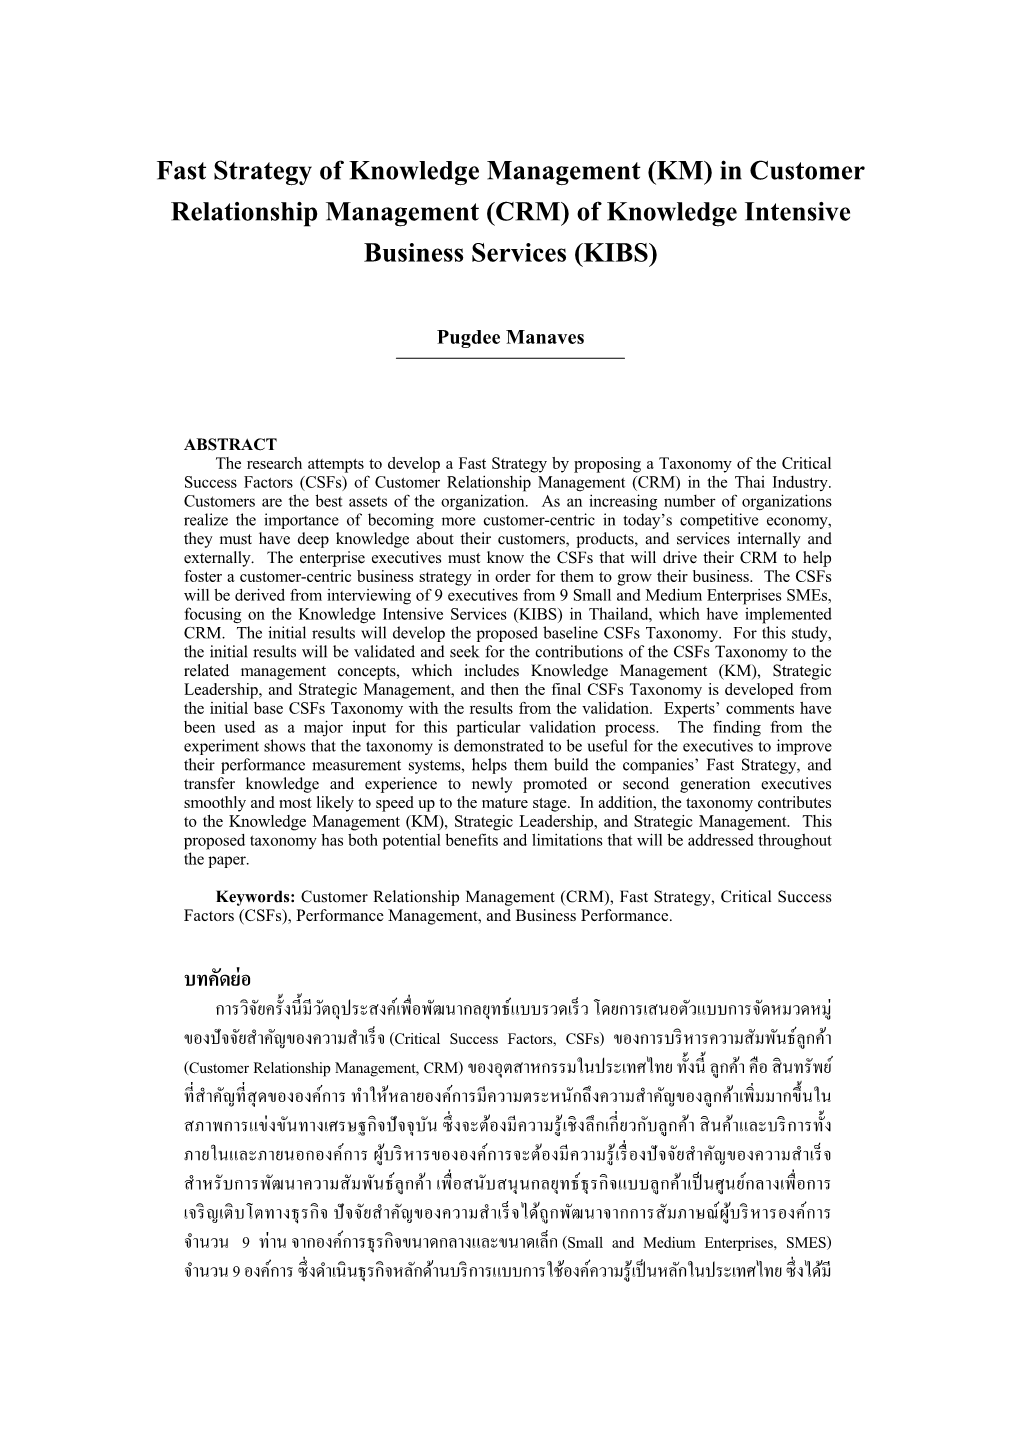 CRM) of Knowledge Intensive Business Services (KIBS